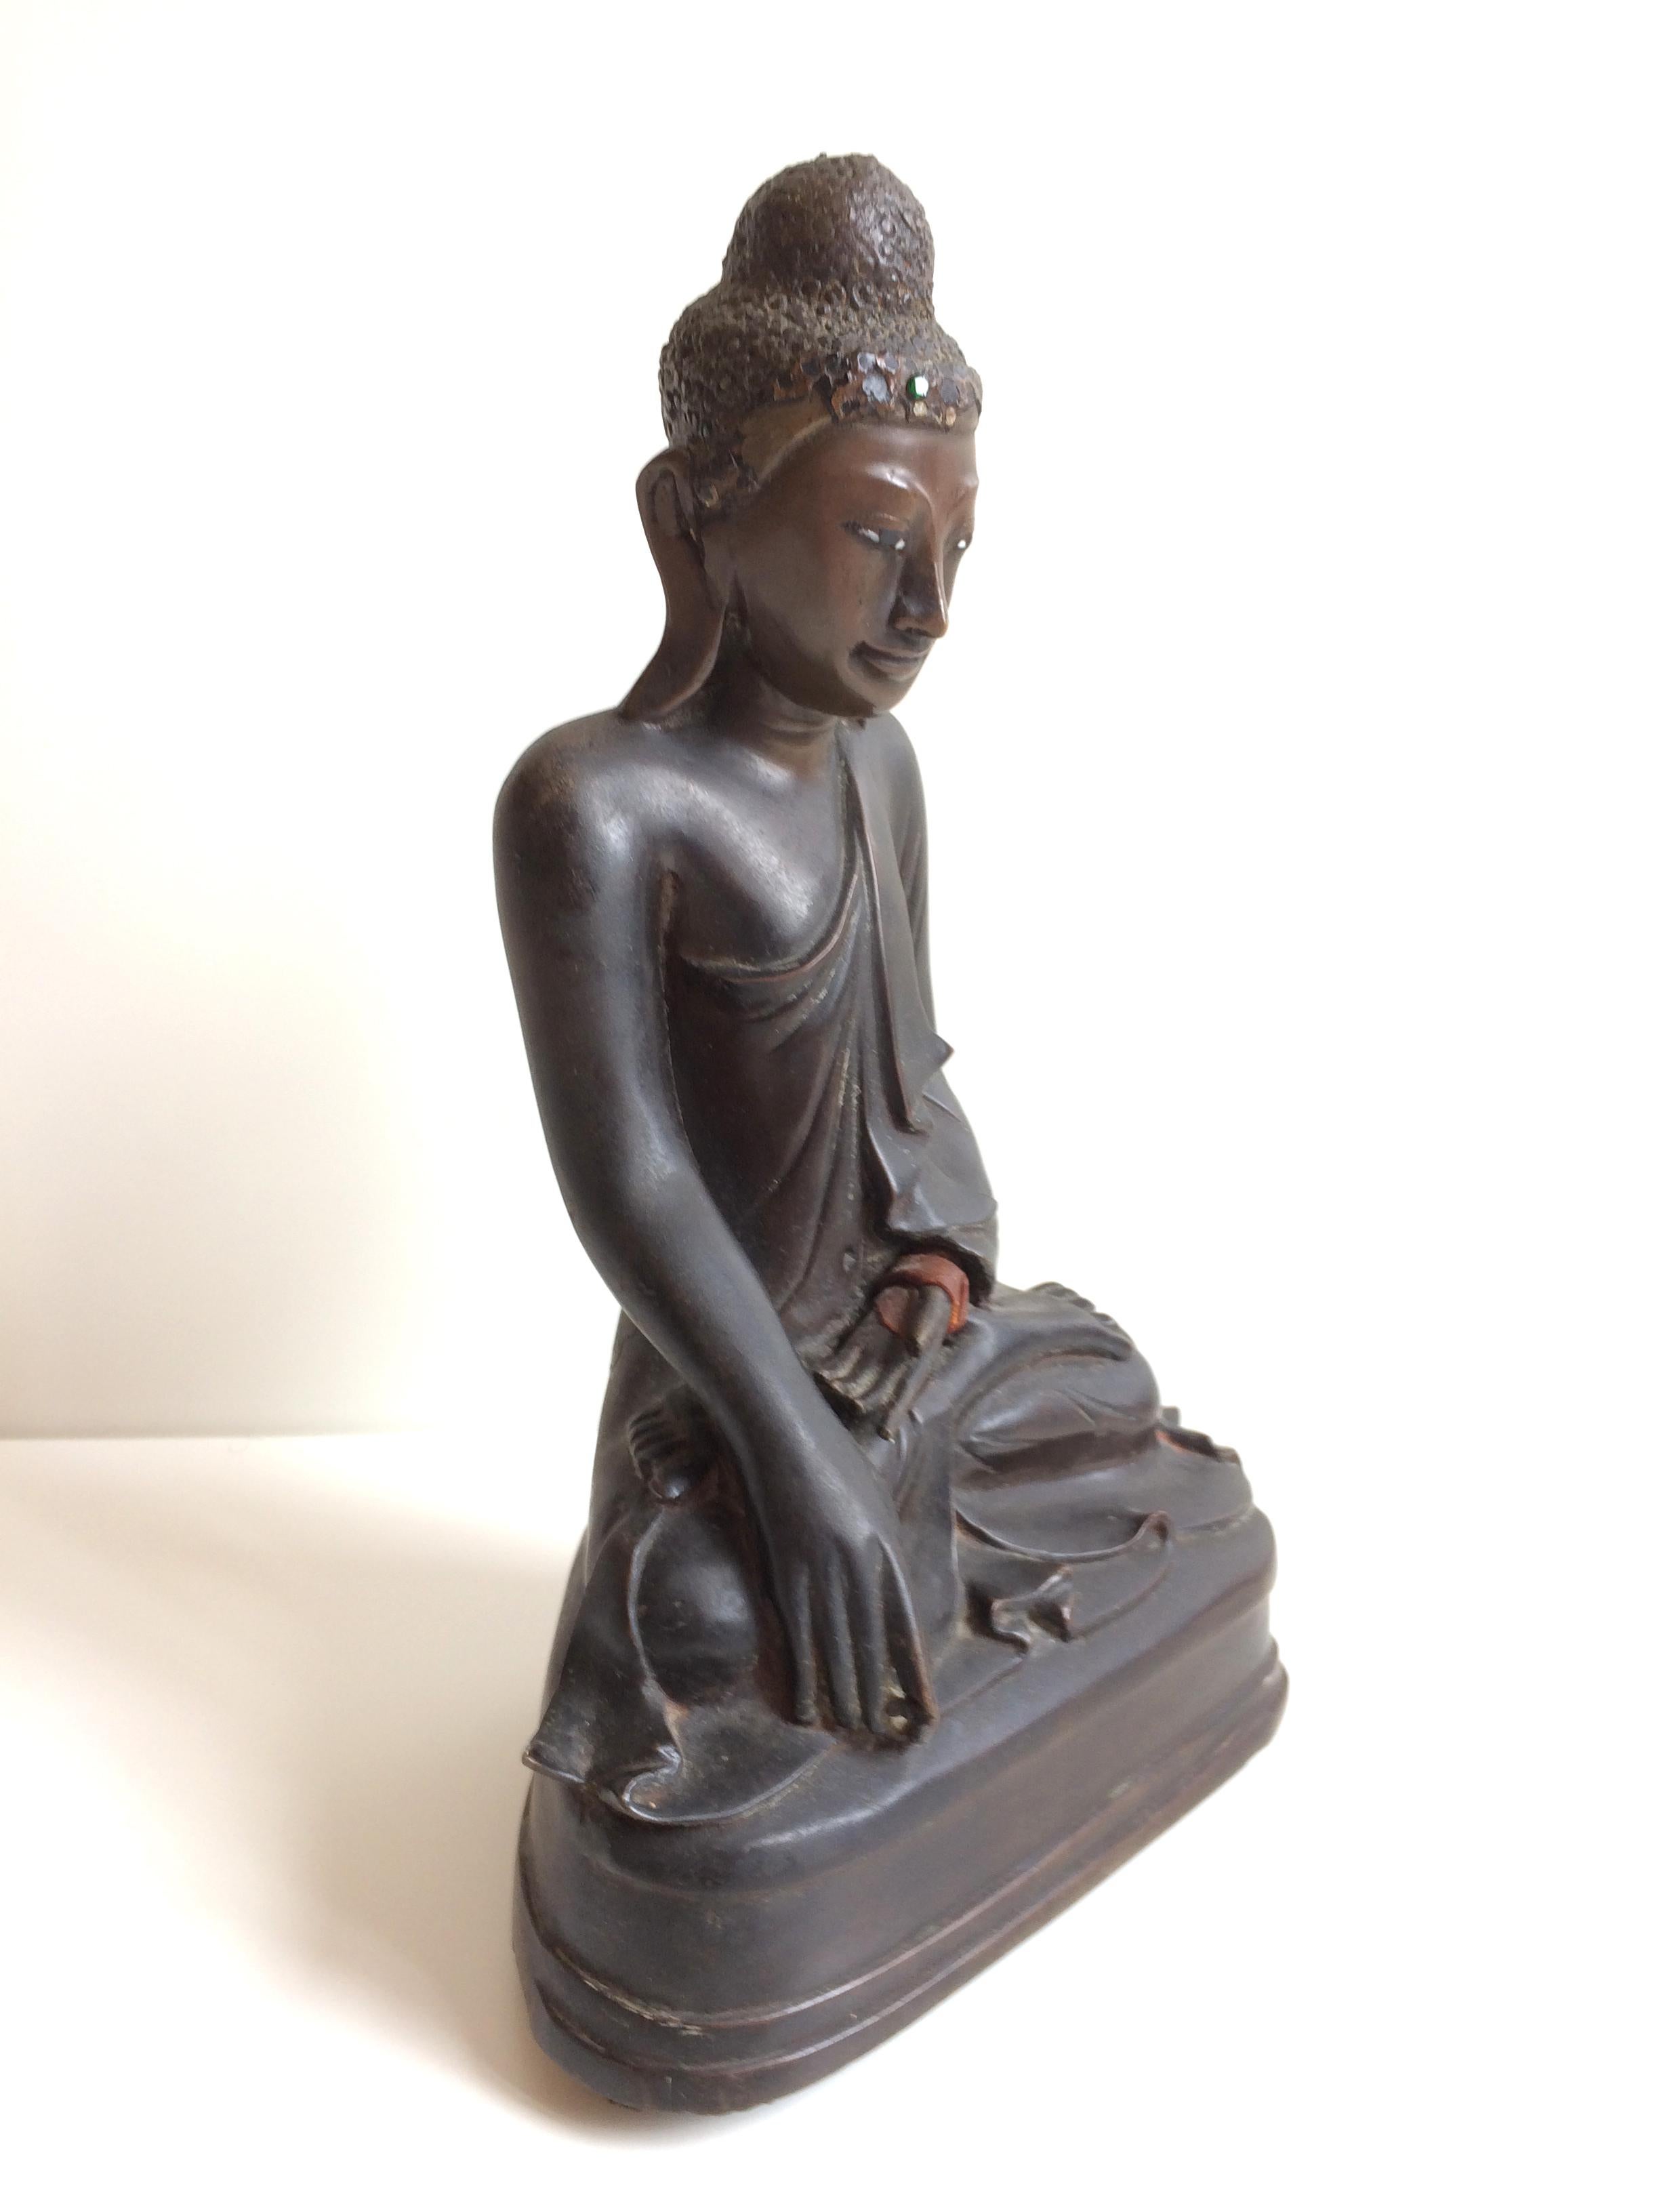 Antique 19th century Mandalay period bronze seated Buddha, Burma, circa 1880.
Seated with the right hand lowered bhumisparsimudra and the left hand rest in the lap.
In very good condition commensurate of age. The resting hand has come away at some